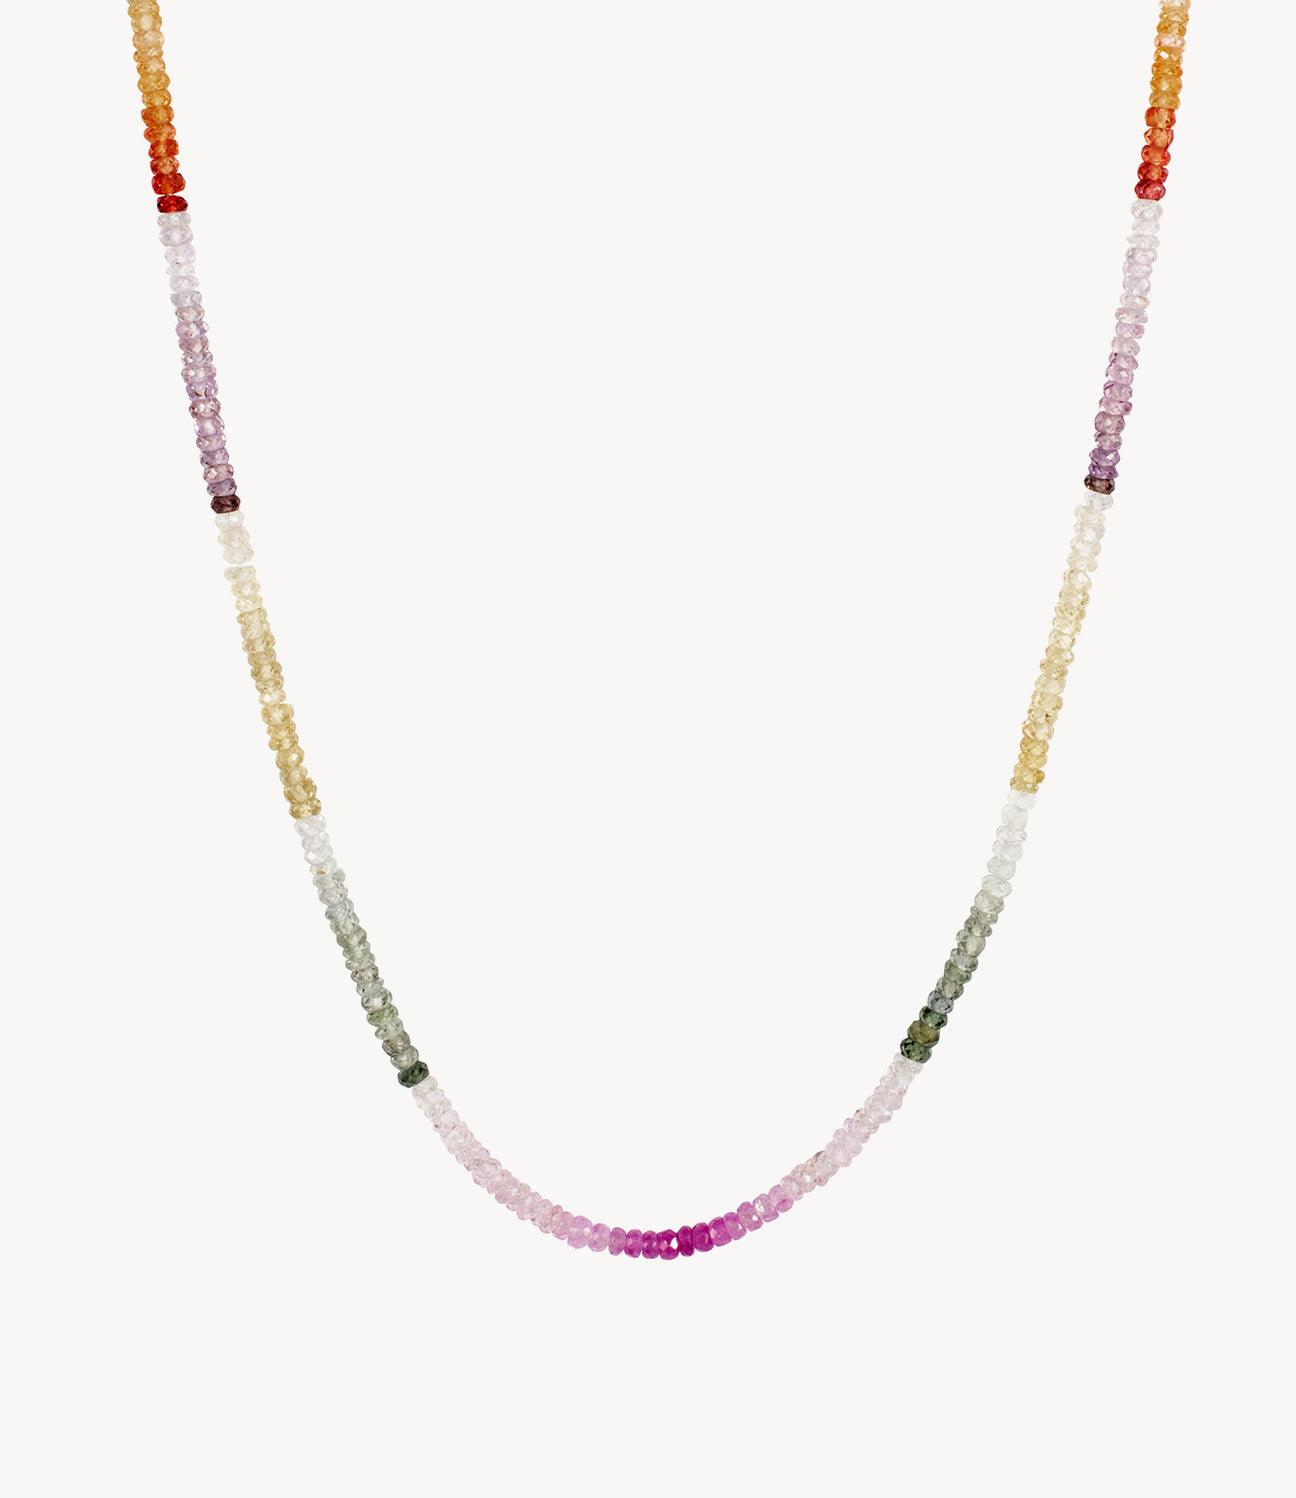 Graduated Rainbow Sapphire Beaded Necklace - Roxanne First